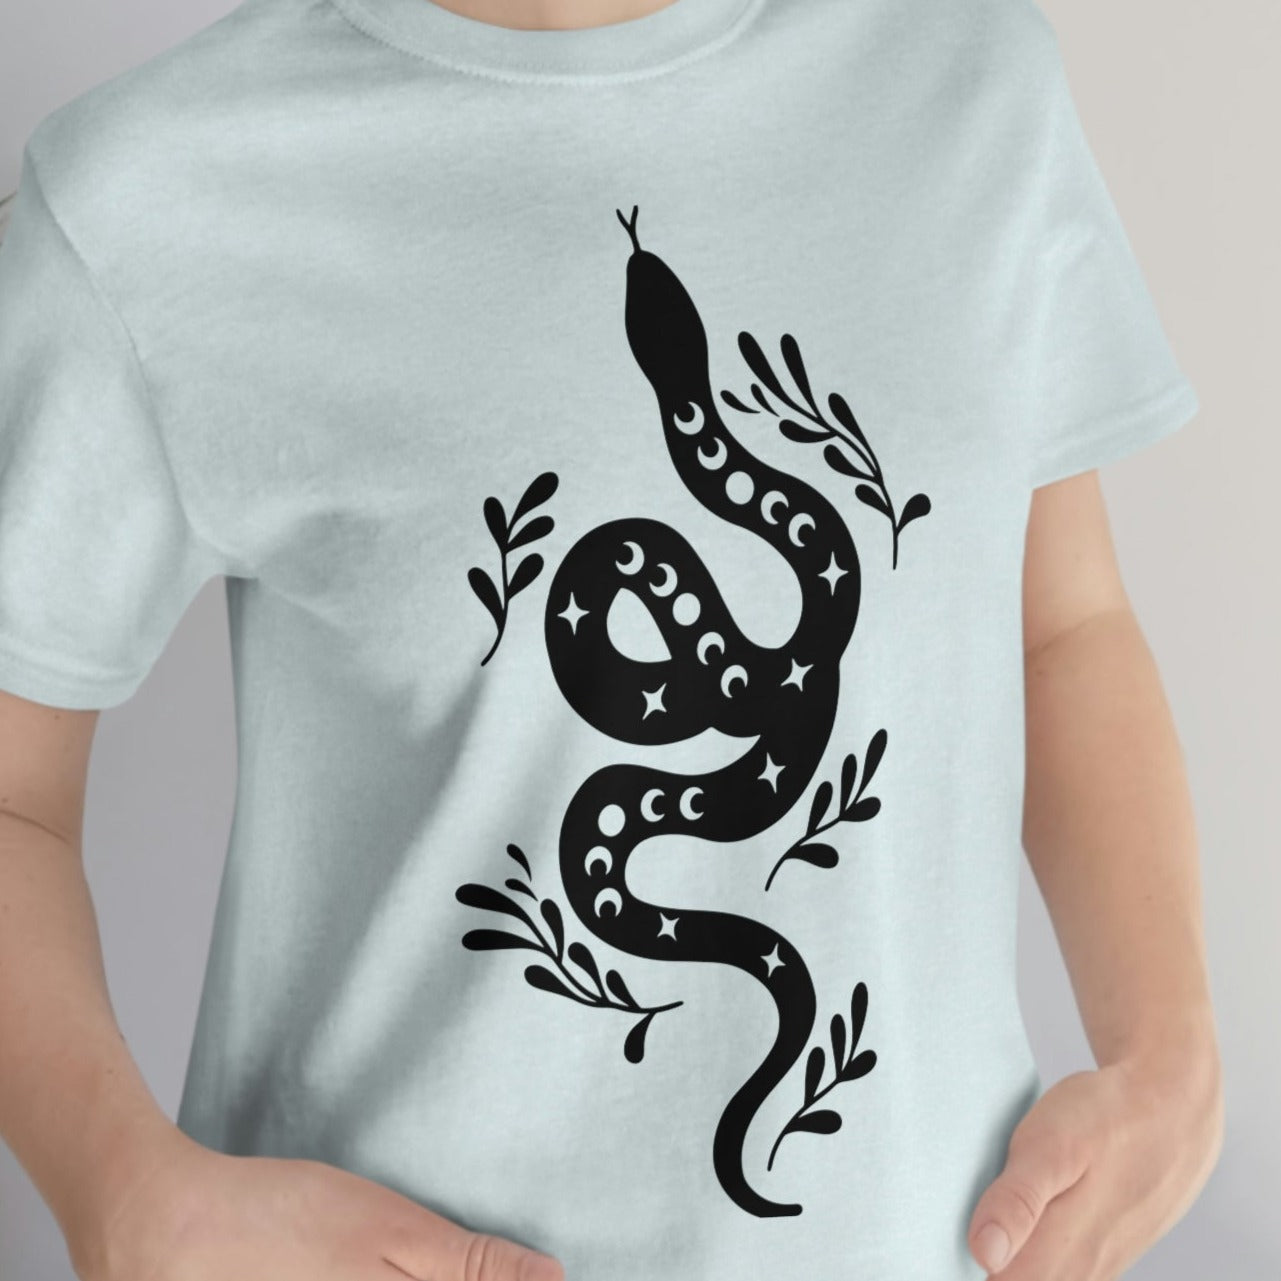 Celestial snake witchy tee for women